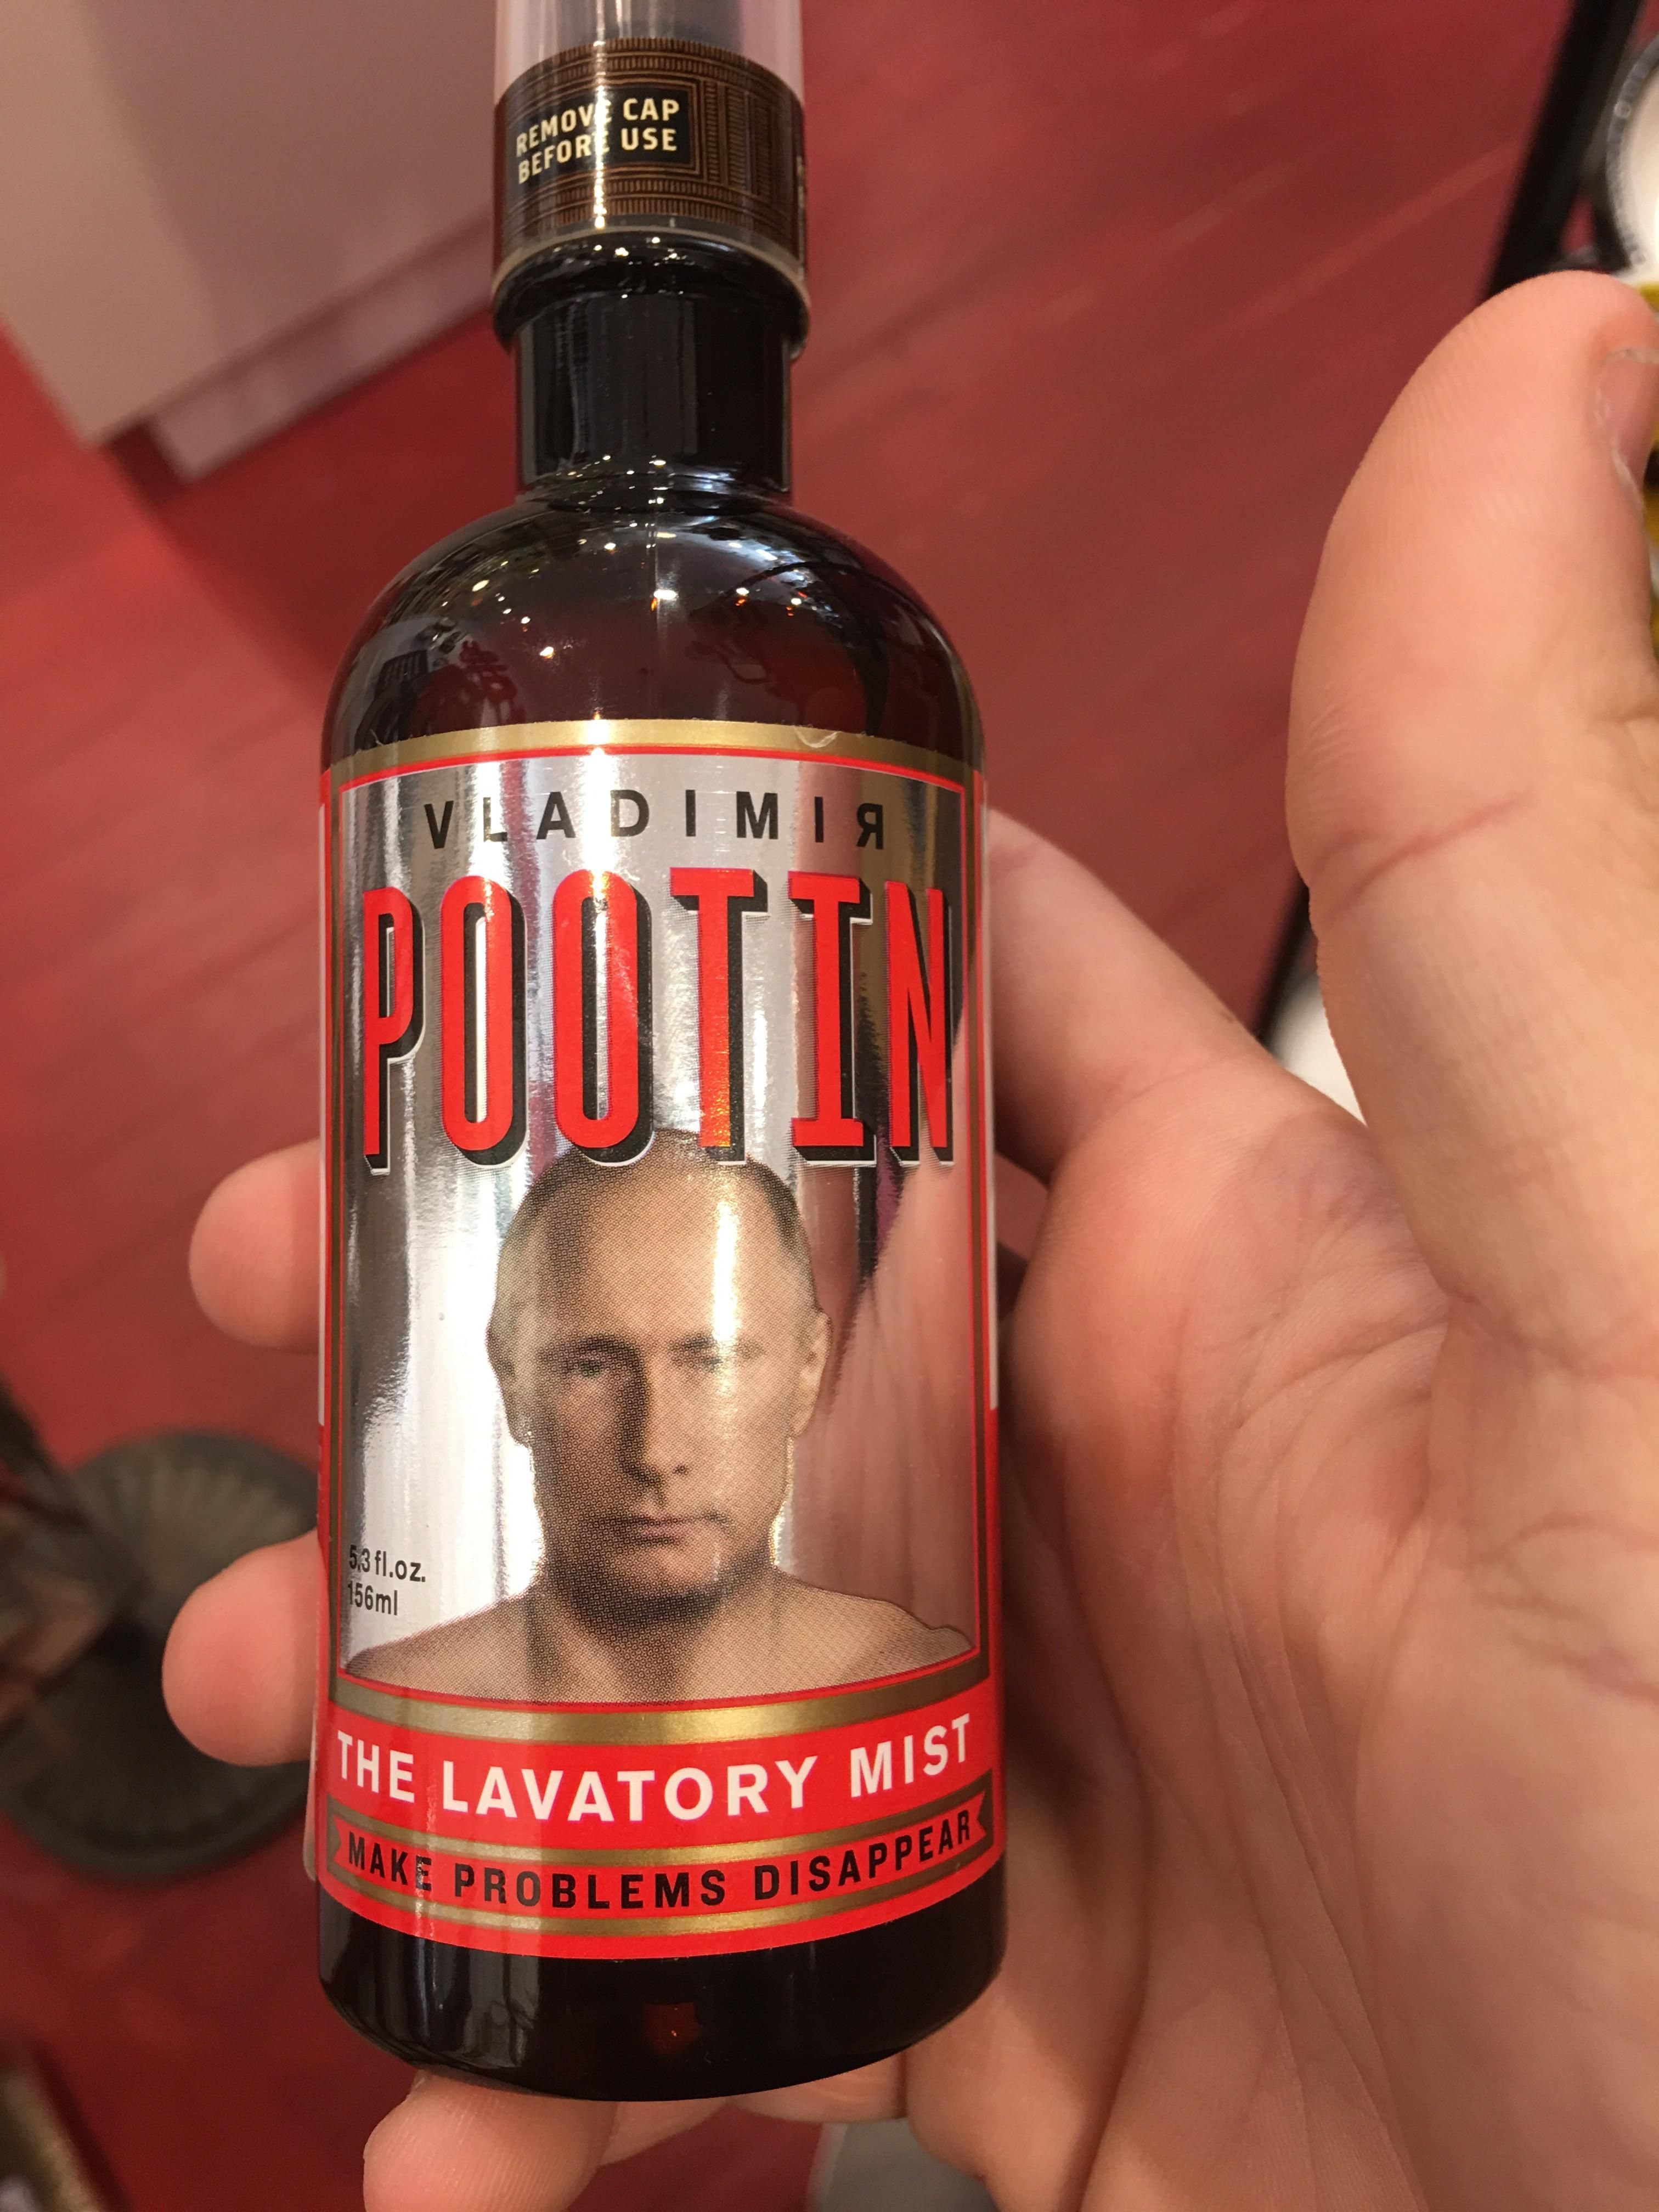 My wife didn’t approve of our new bathroom scent.